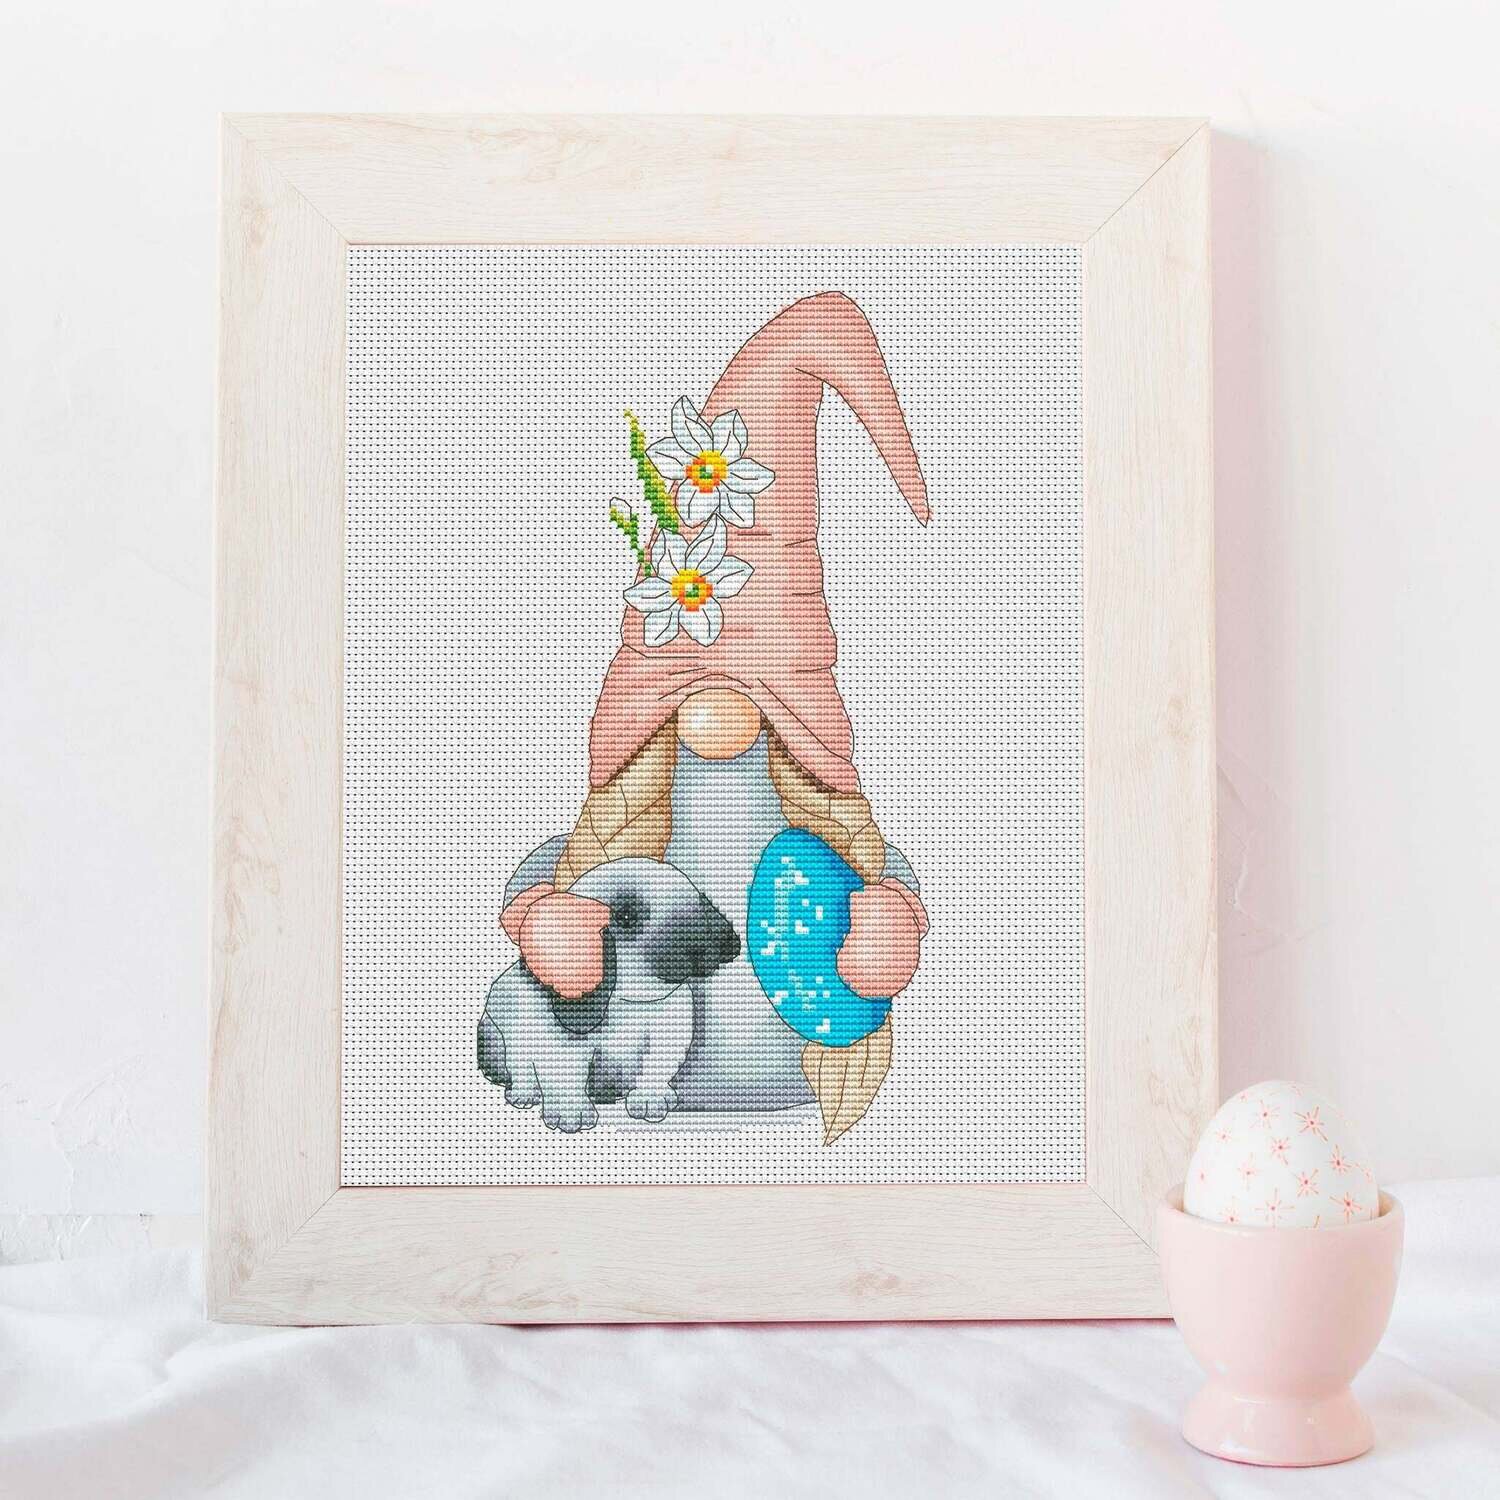 Easter gnome, Easter embroidery, Bunny cross stitch, Cross stitch pattern, Gnome cross stitch, Counted cross stitch